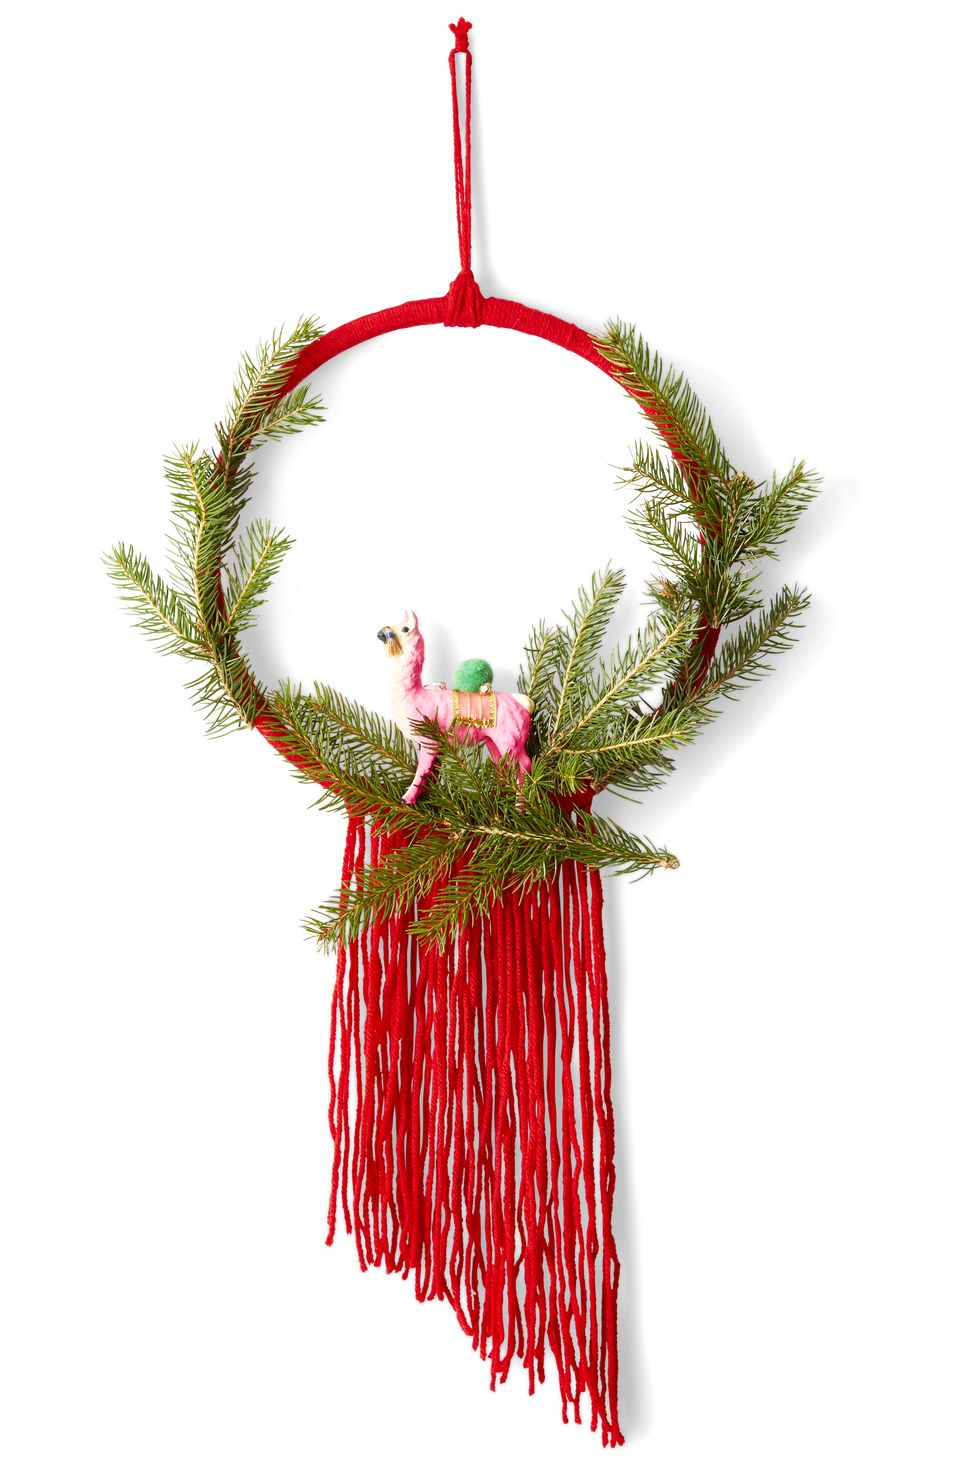 101 Christmas Wreaths Ideas to Add Festive Style to Your Front Door